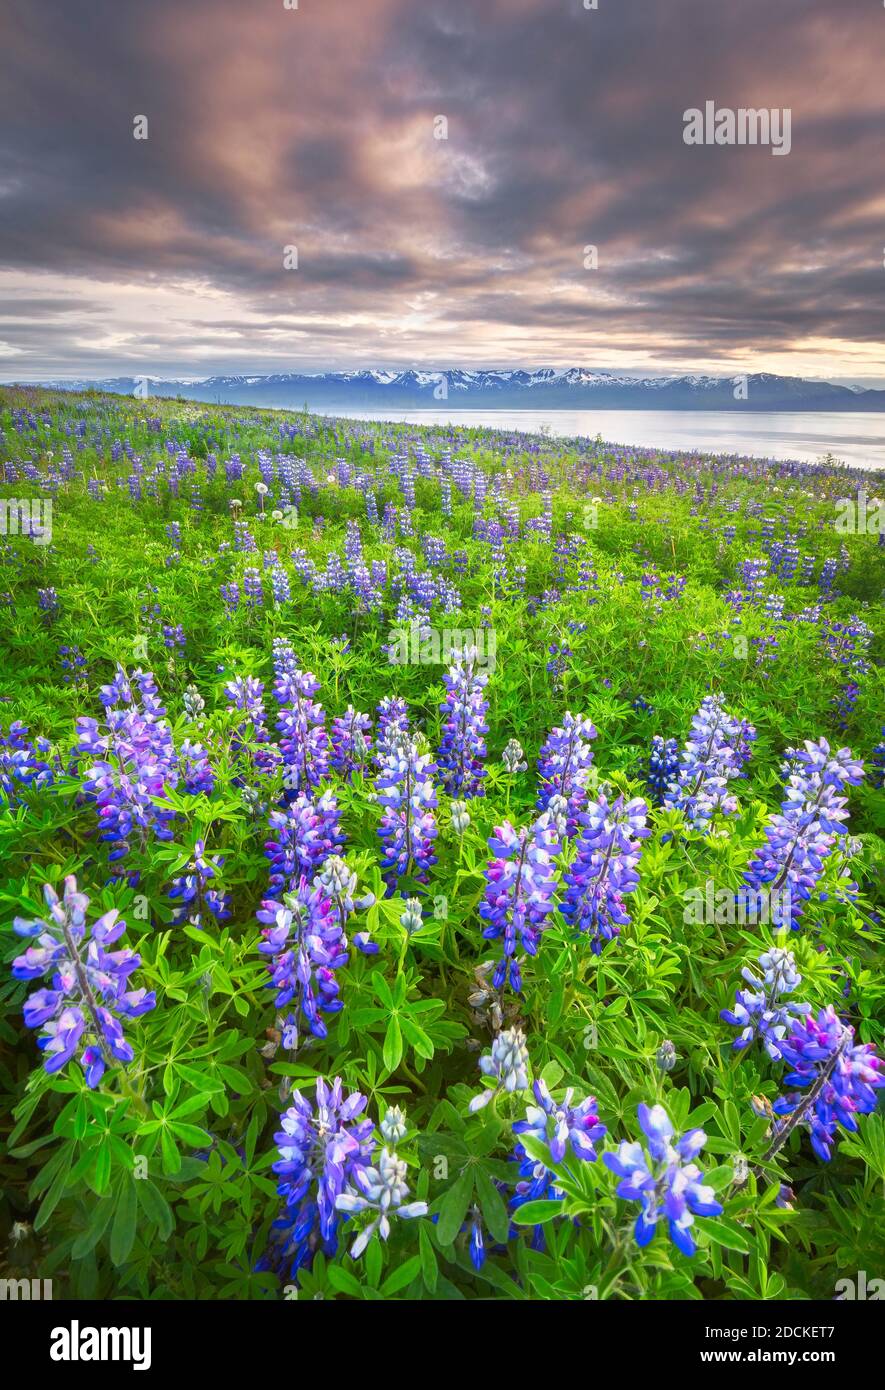 Violet lupins on a hill behind the sea and snow-covered mountains in the evening light with dramatic sky, Norourping, Norourland eystra, Iceland Stock Photo